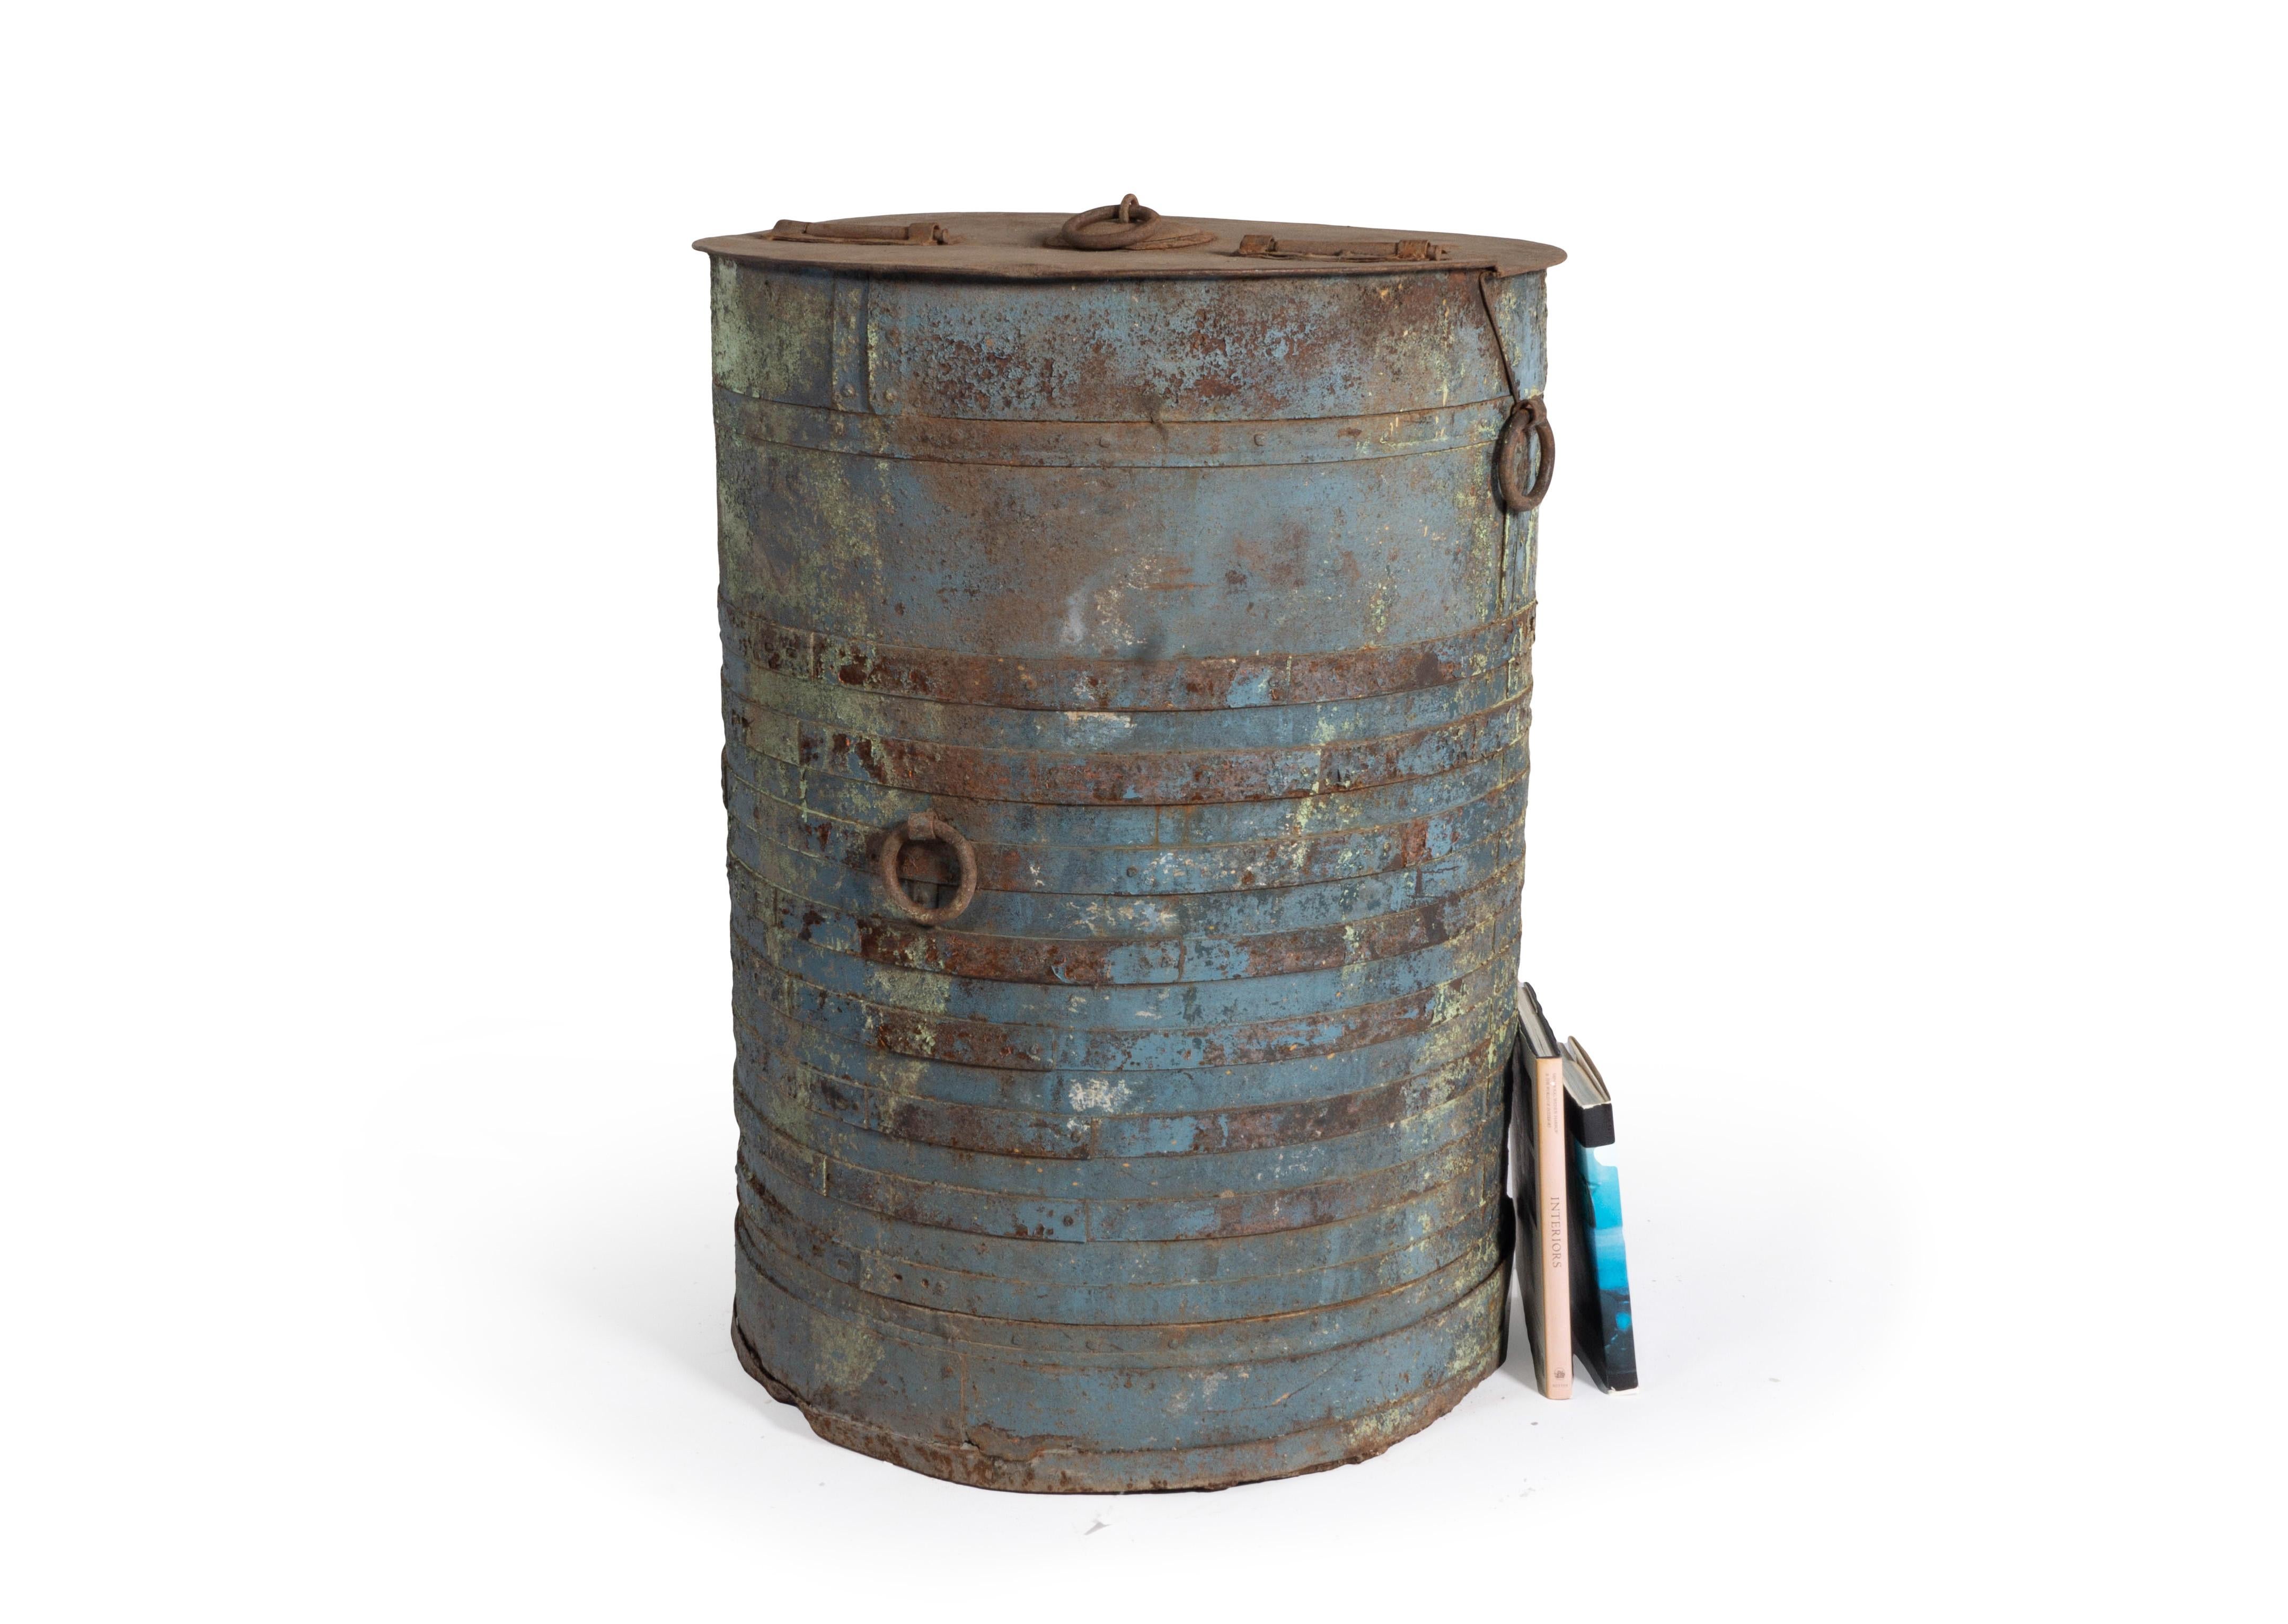 This vintage European storage bin is a great element to add to your indoor or outdoor space to add contrast in texture and color. This one of a kind storage bin is heavily weathered and rusted finish through which the original blue paint patina